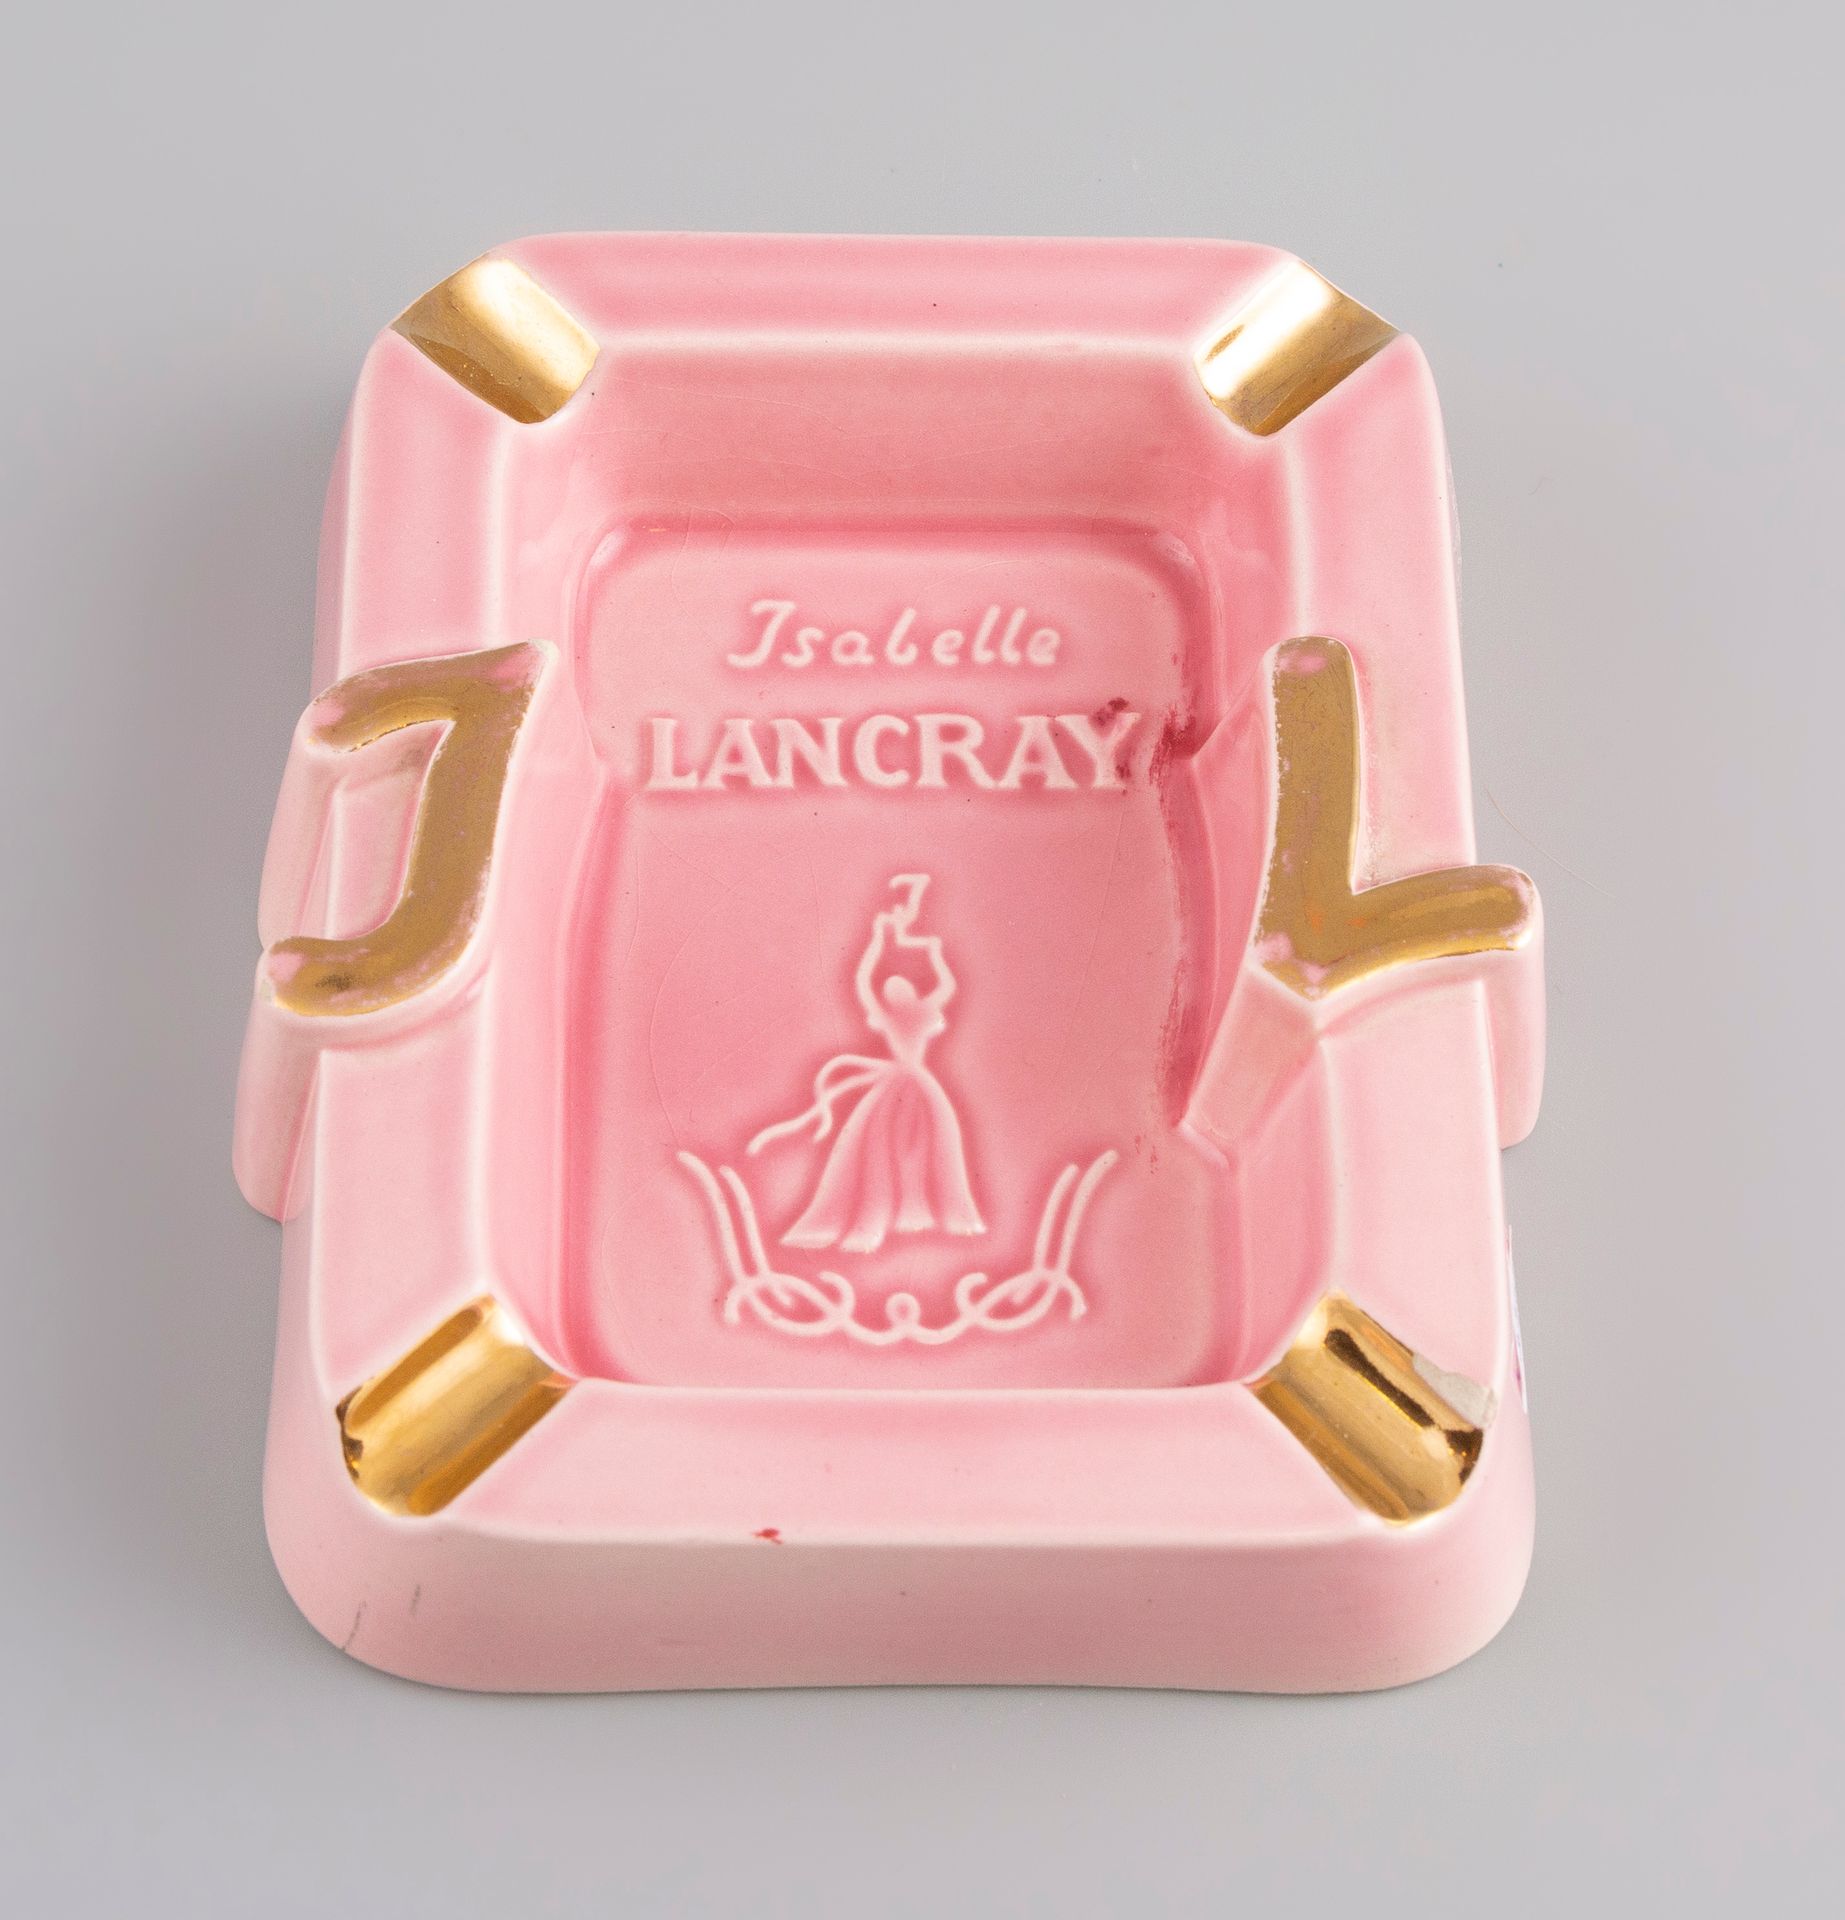 Null Ceramic ashtray with pink background Isabelle LANCRAY. 16x13cm.